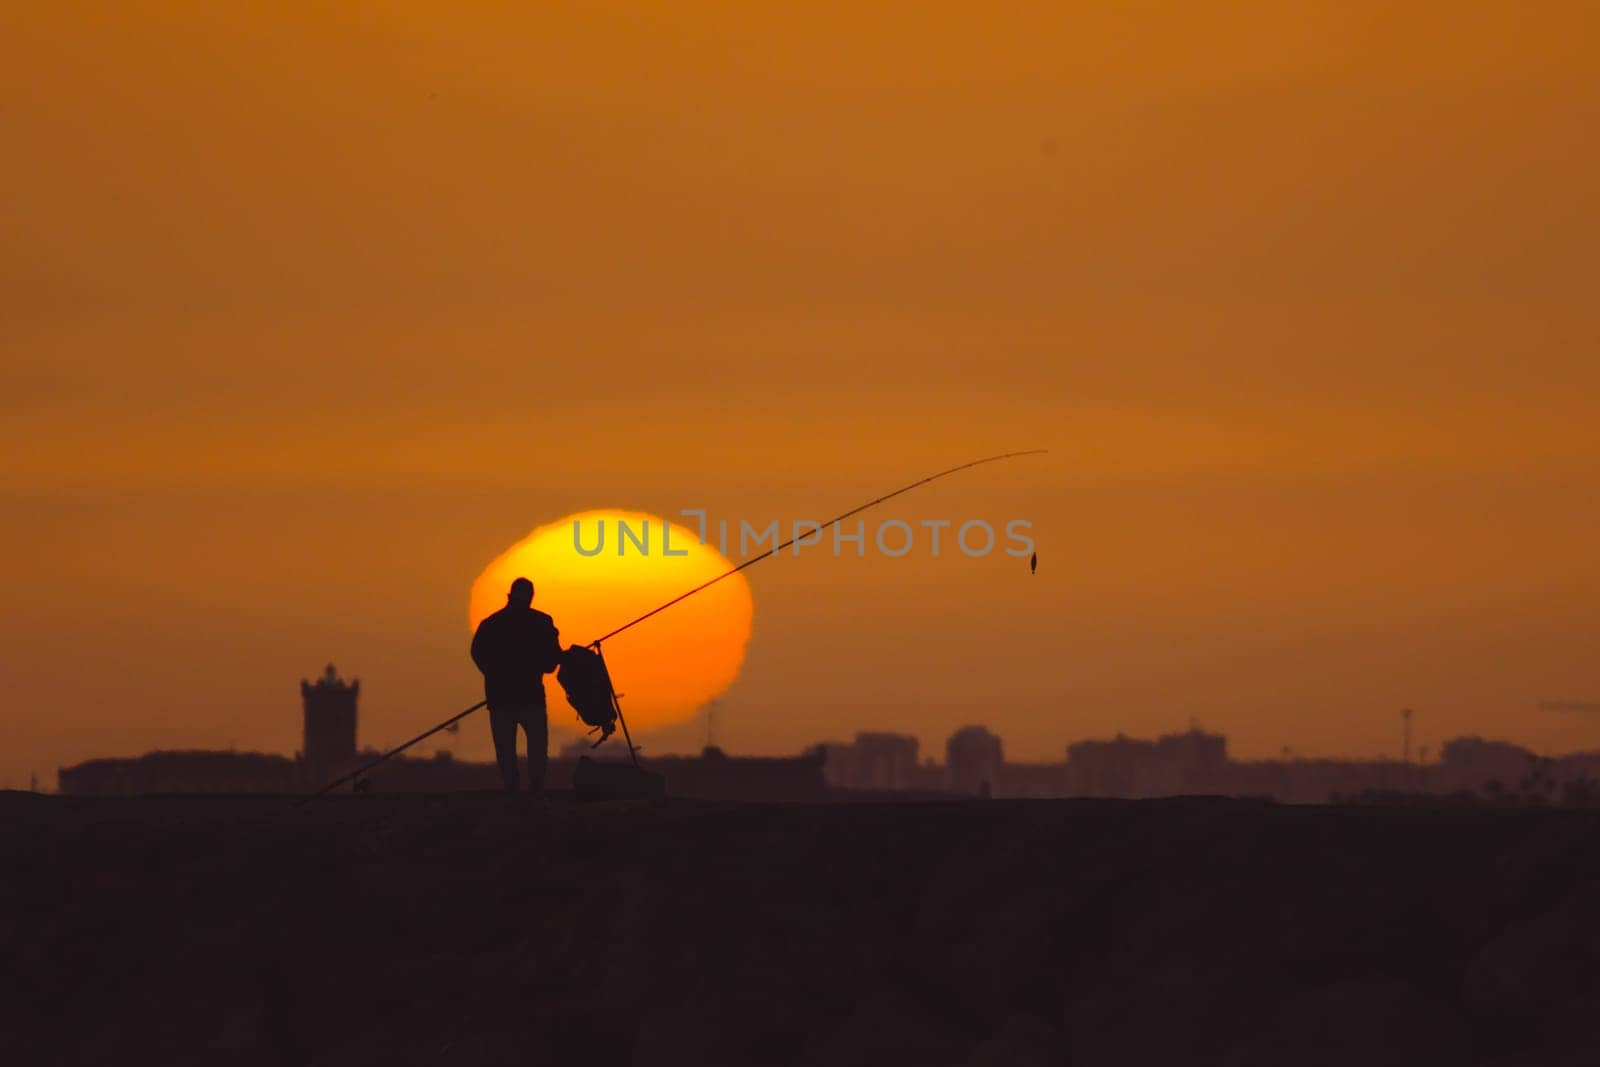 A man is fishing at sunset standing on the hill. Mid shot